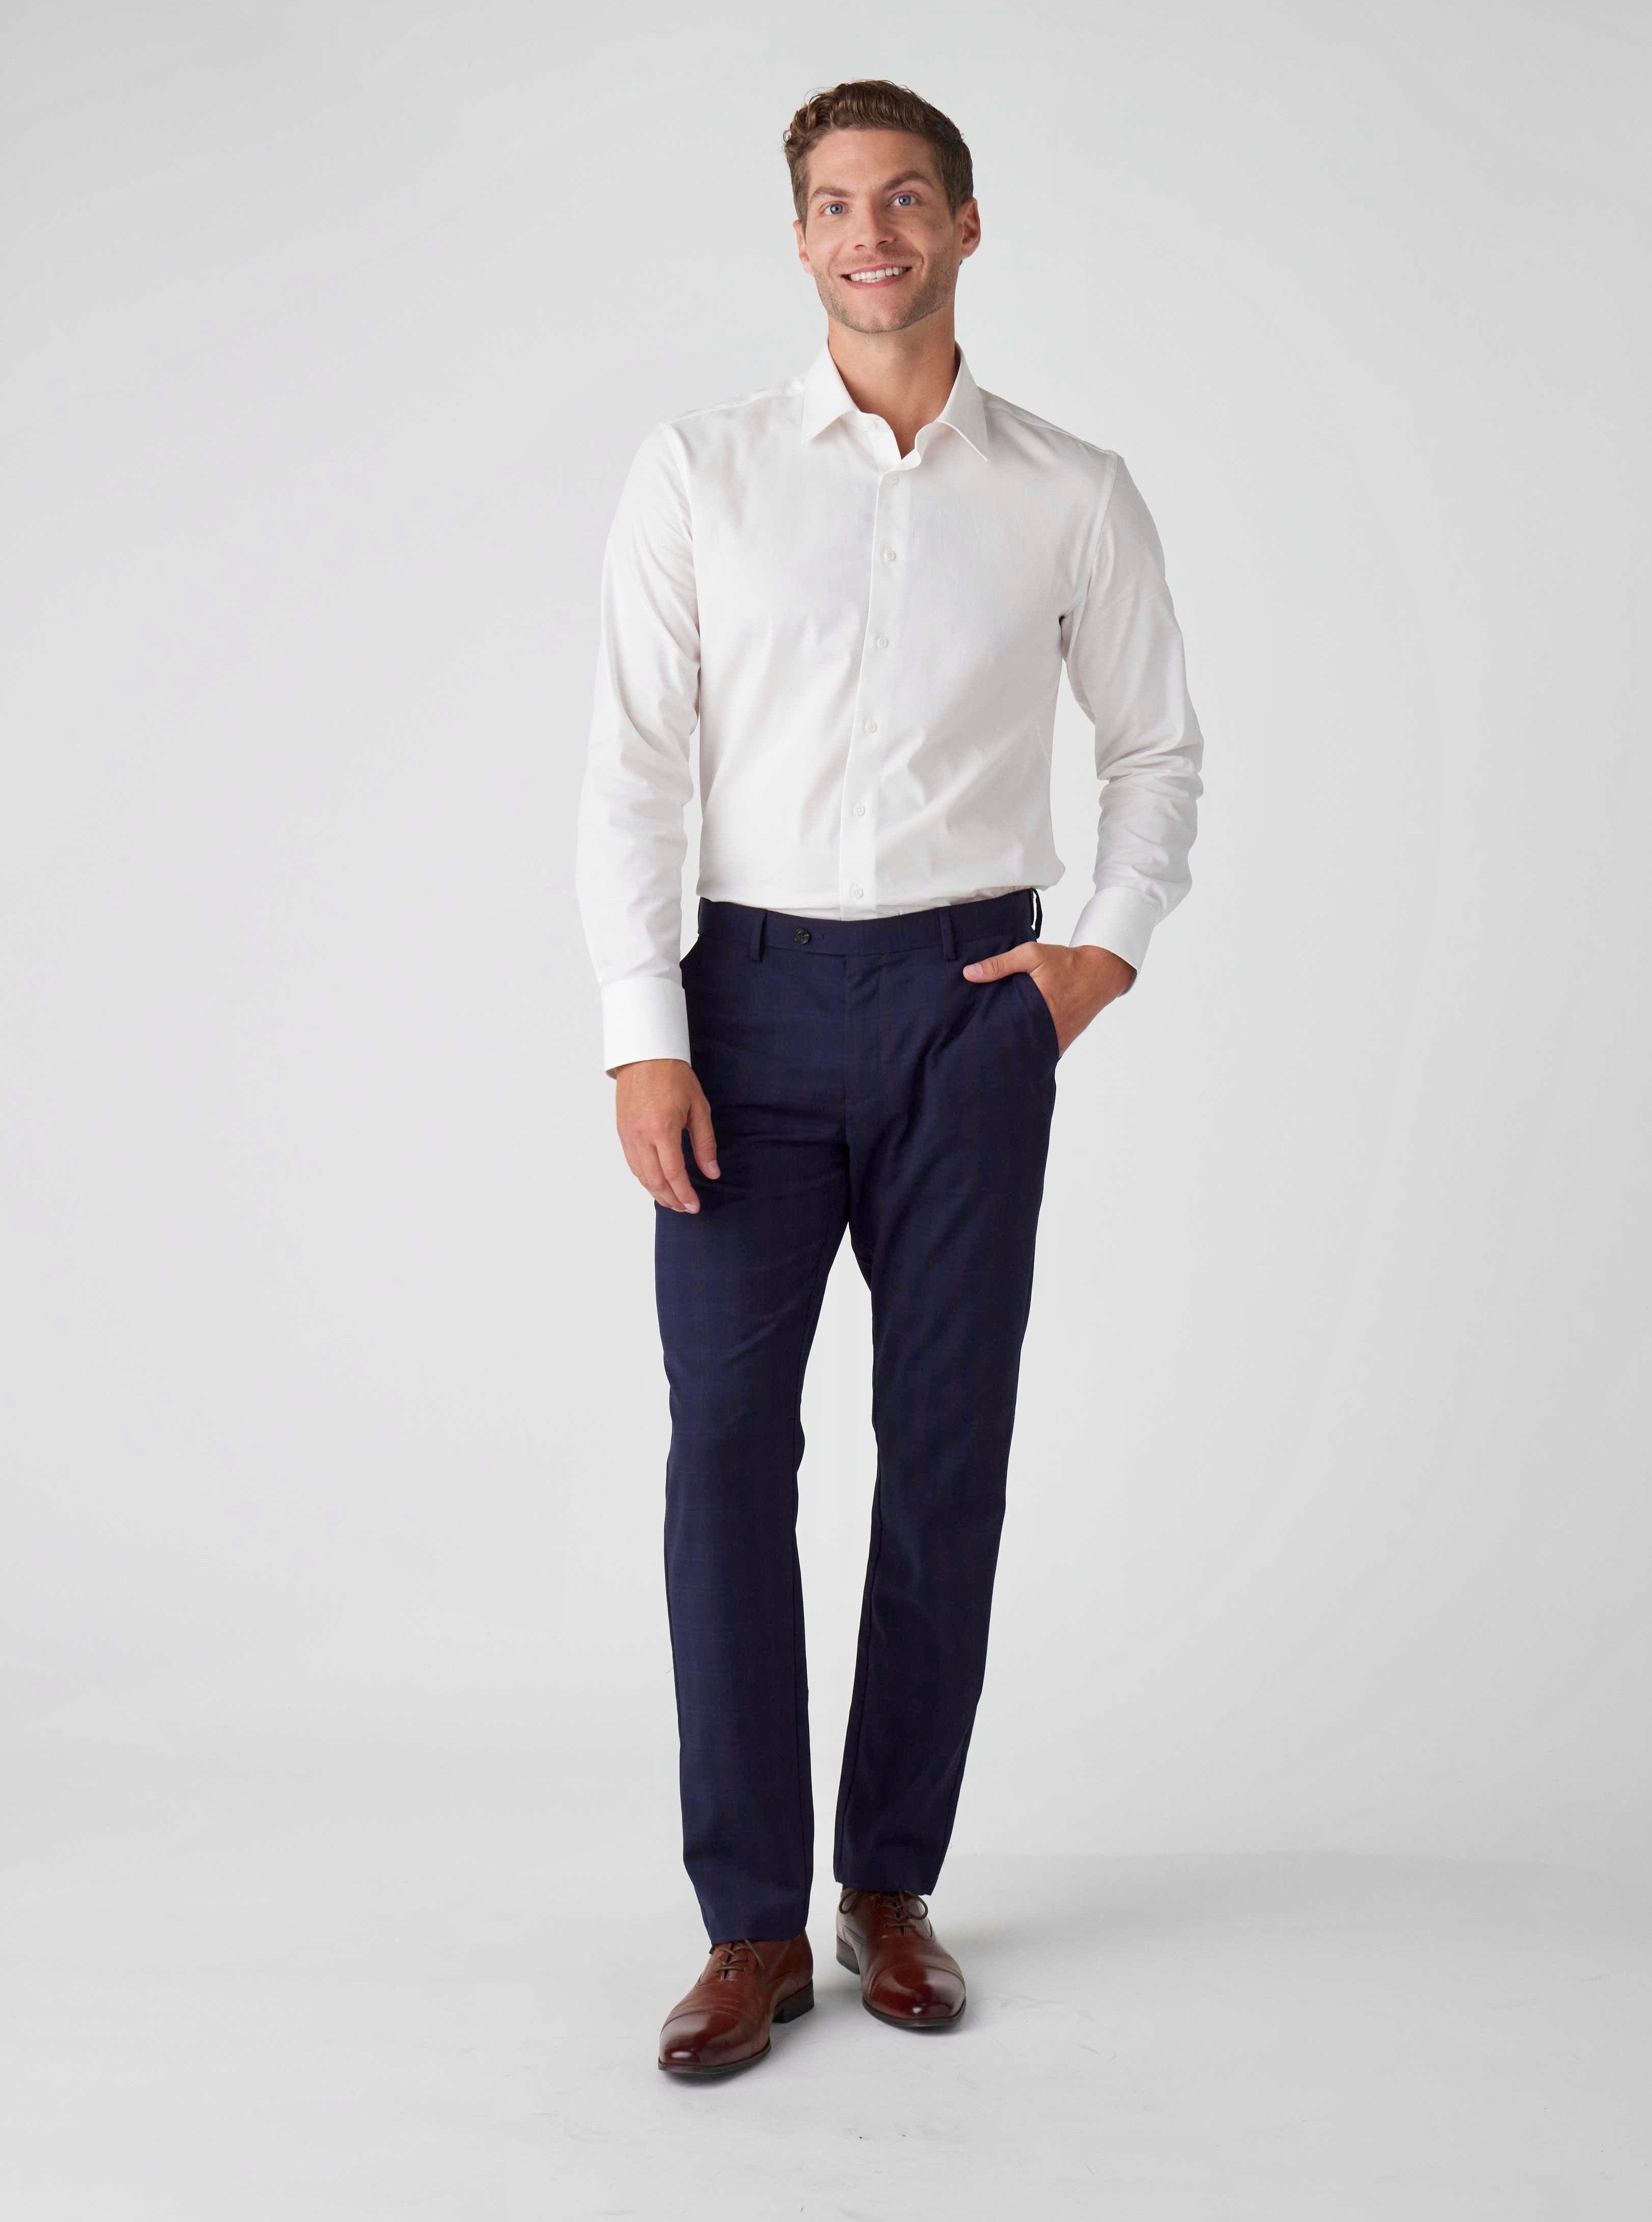 Classic Oxford Dress Shirt - White | The Man Refined